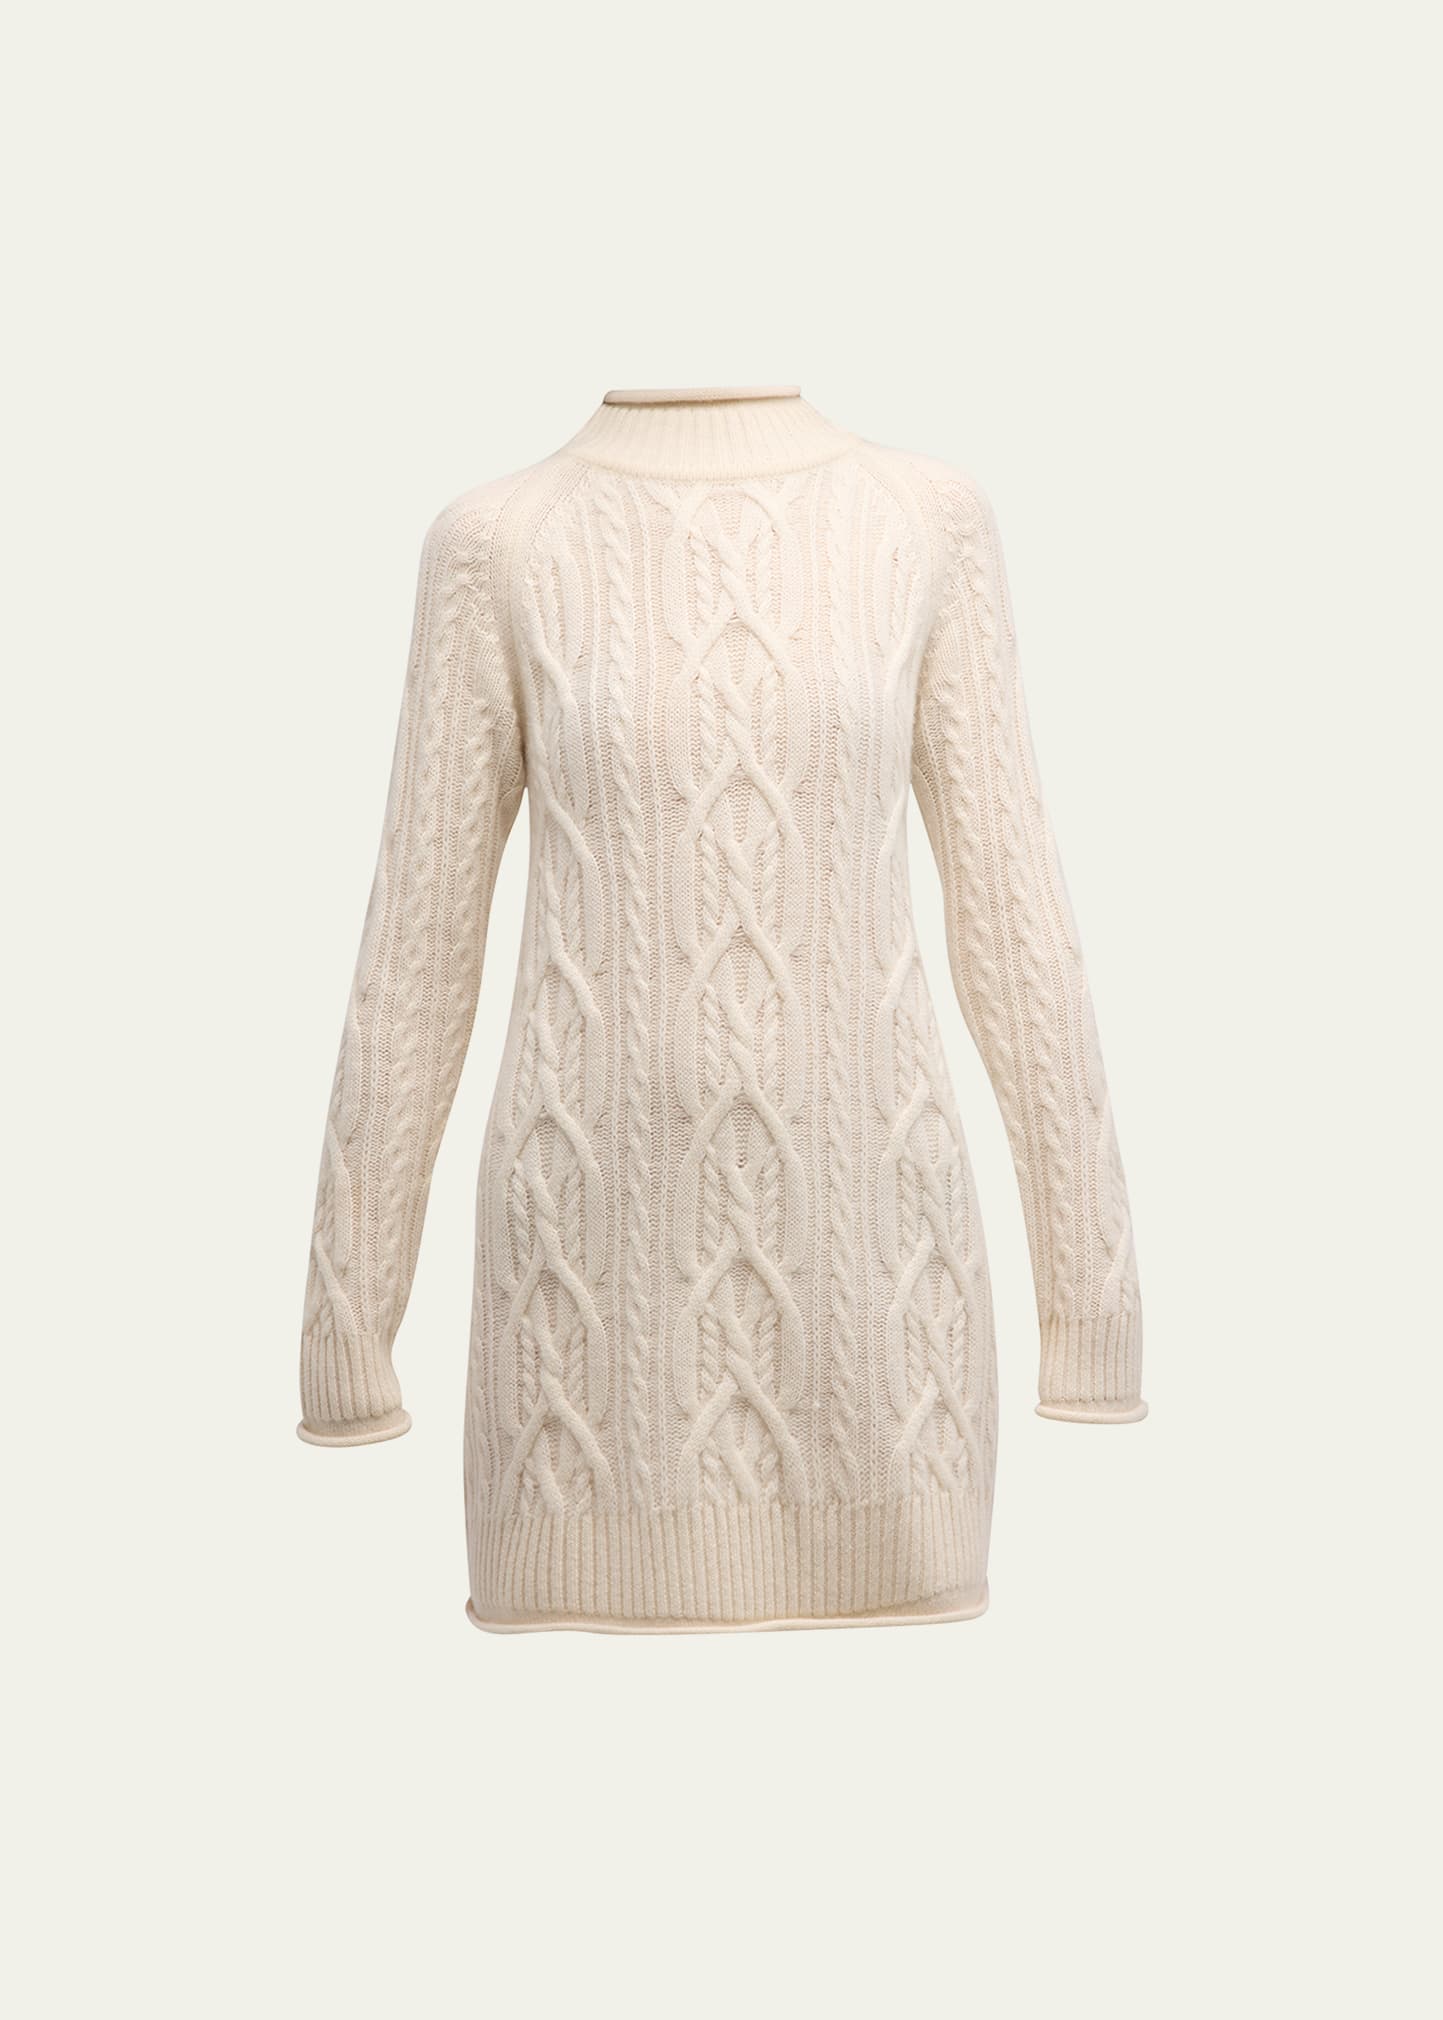 Loulou Studio Kuma Cable Knit Cardigan in Ivory – Hampden Clothing